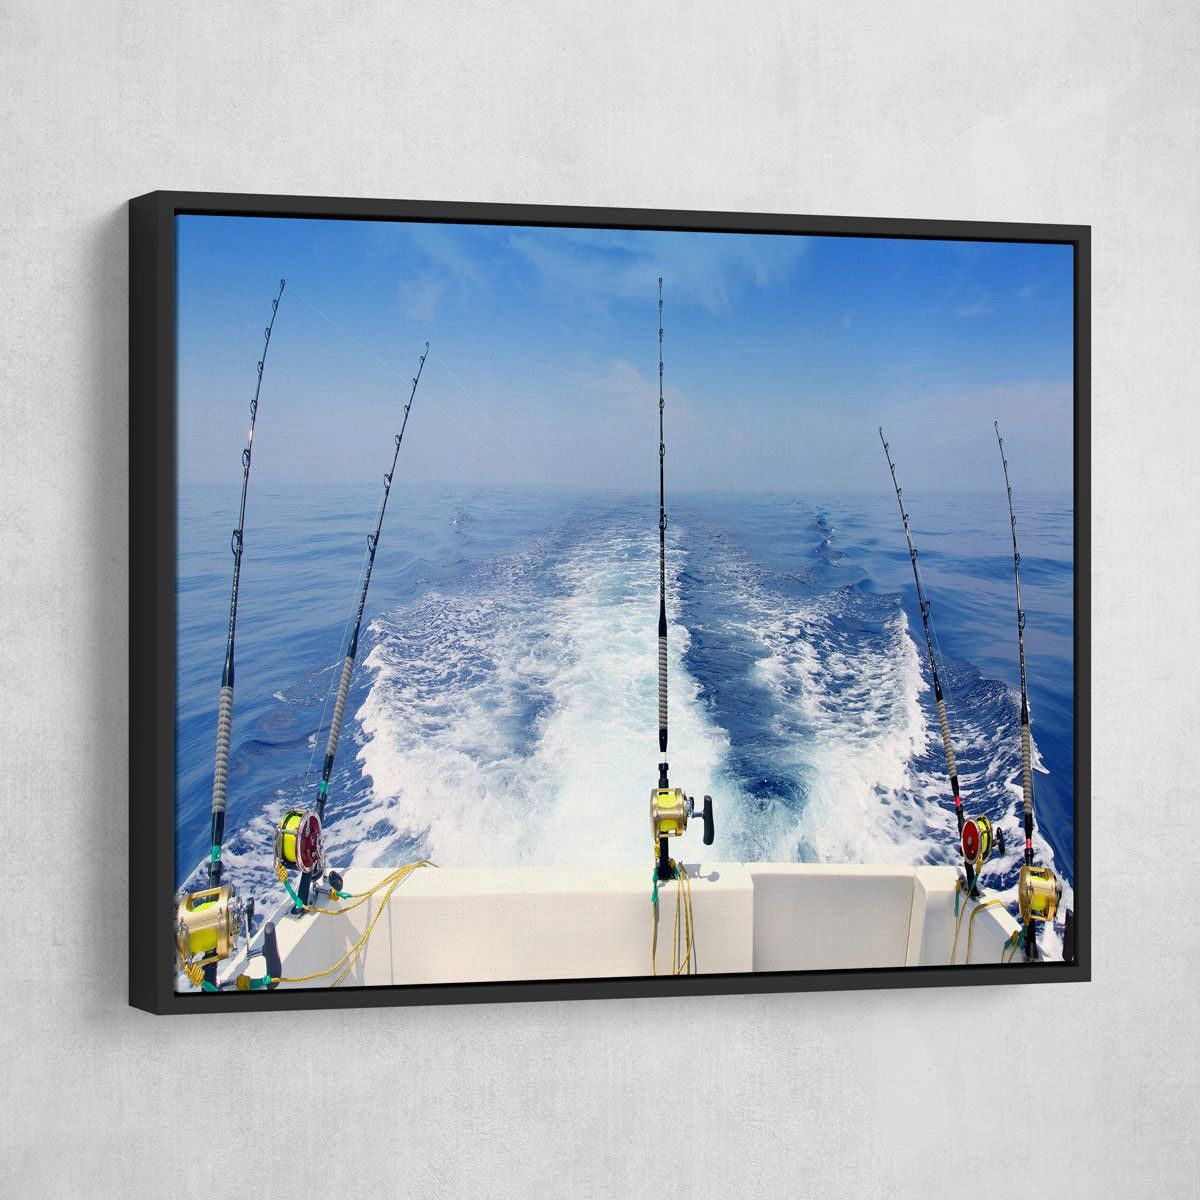 Fishing Reels with Cast Lines Off The Back of A Boat | Large Solid-Faced Canvas Wall Art Print | Great Big Canvas